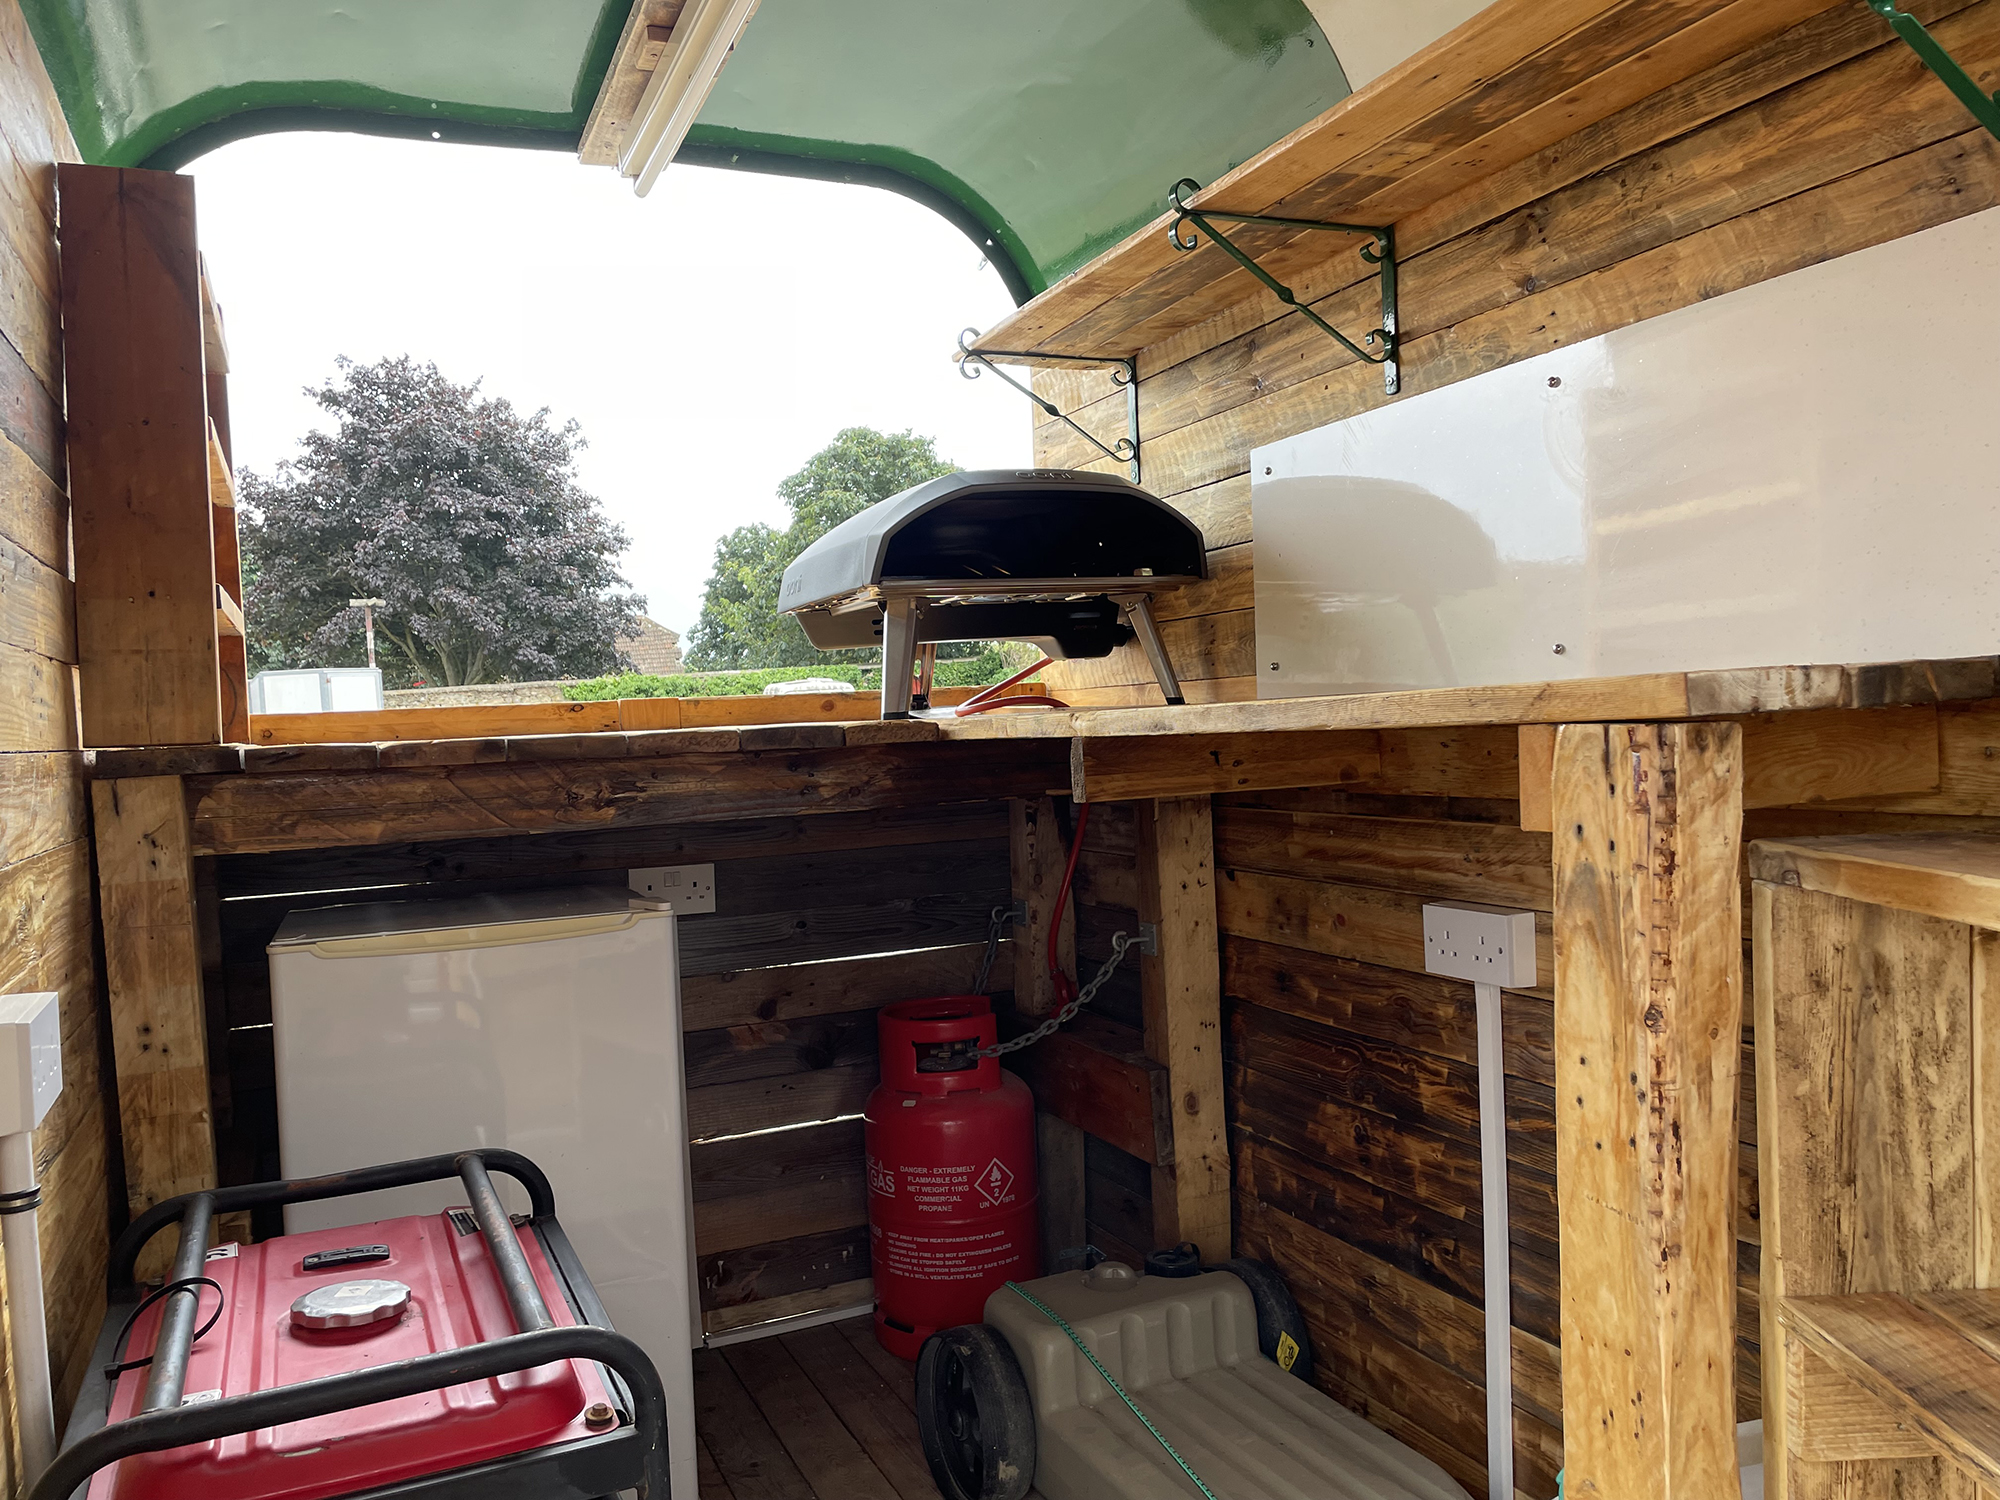 Italian Style Catering Trailer Horse Box - Image 8 of 17